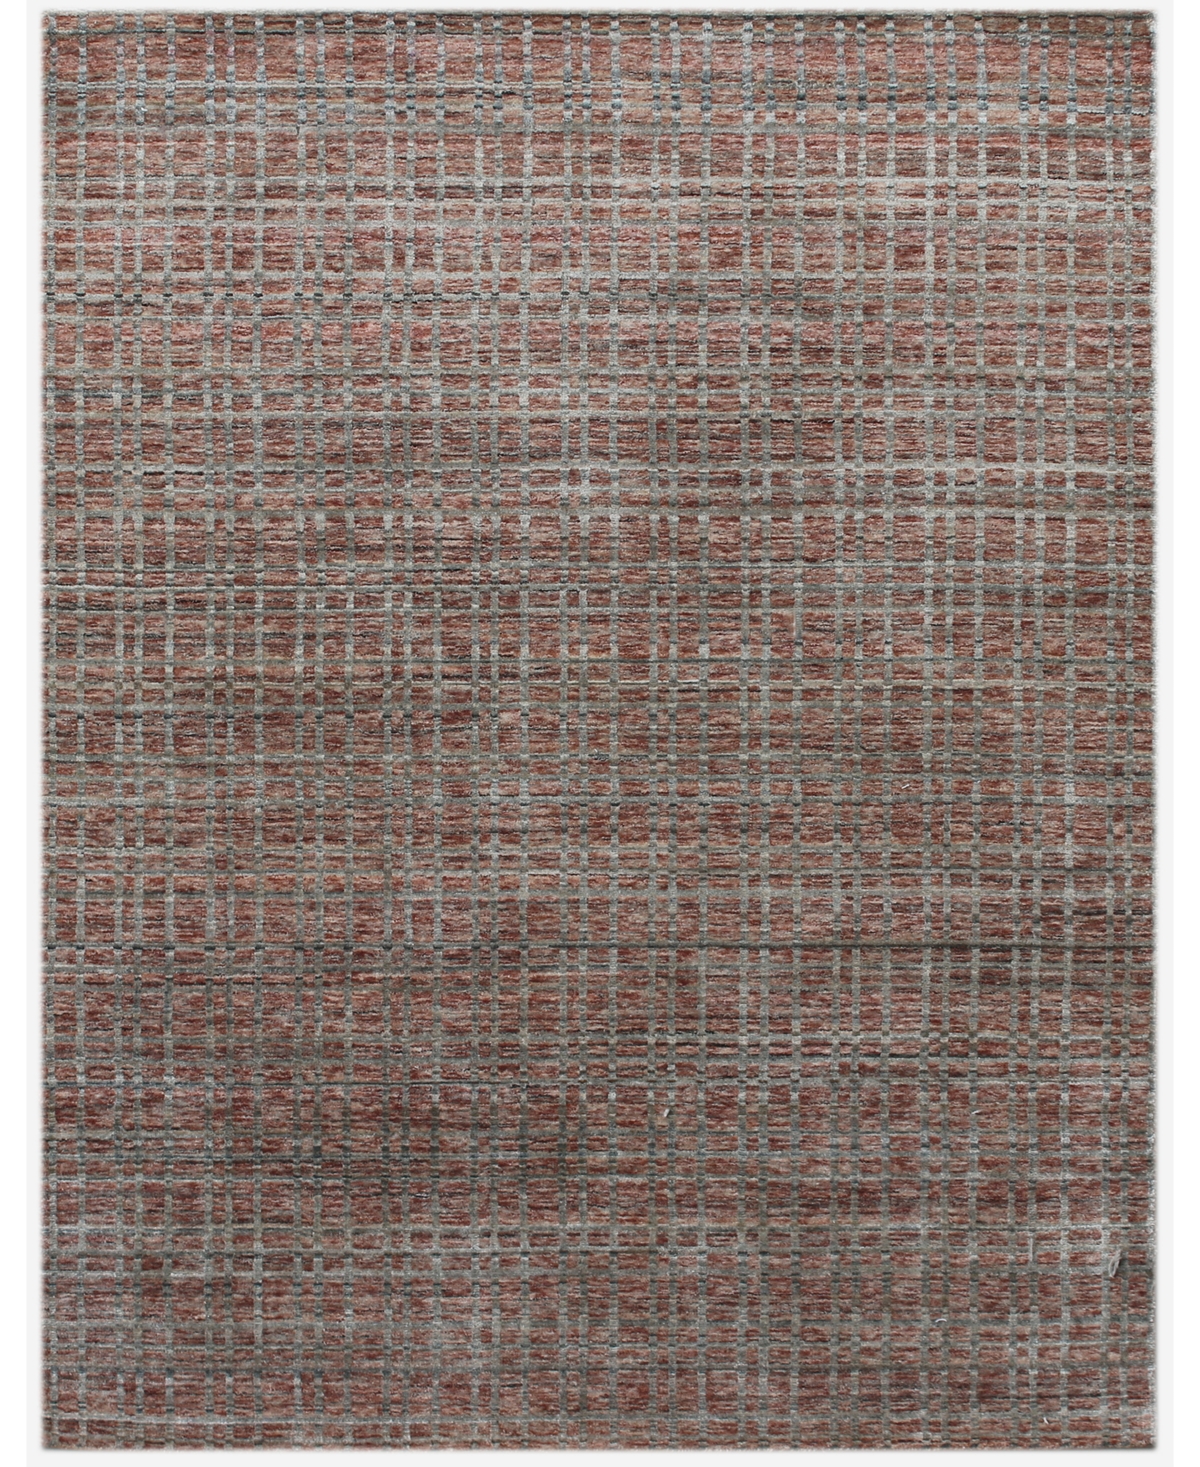 Amer Rugs Paradise Patrice Area Rug, 3' X 5' In Brick